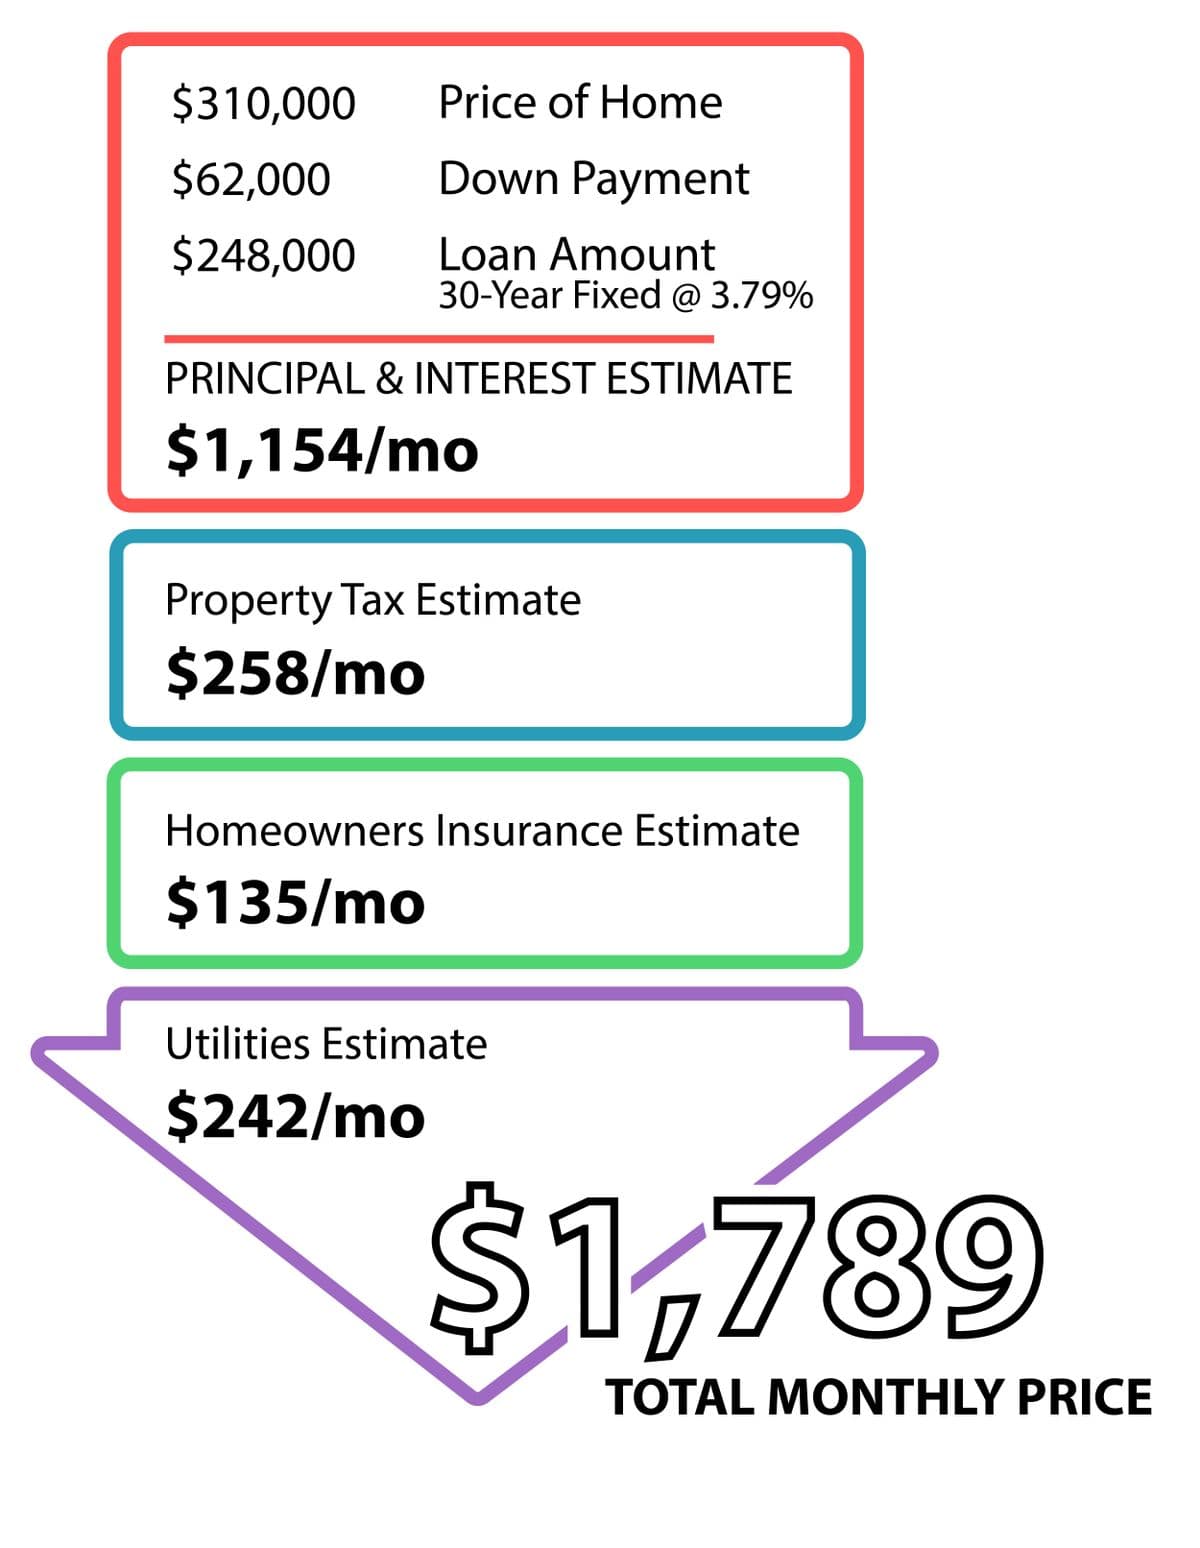 $310,000
Price of Home
$62,000
Down Payment
$248,000
Loan Amount
30-Year Fixed @ 3.79%
PRINCIPAL & INTEREST ESTIMATE
$1,154/mo
Property Tax Estimate
$258/mo
Homeowners Insurance Estimate
$135/mo
Utilities Estimate
$242/mo
$41,789
TOTAL MONTHLY PRICE
